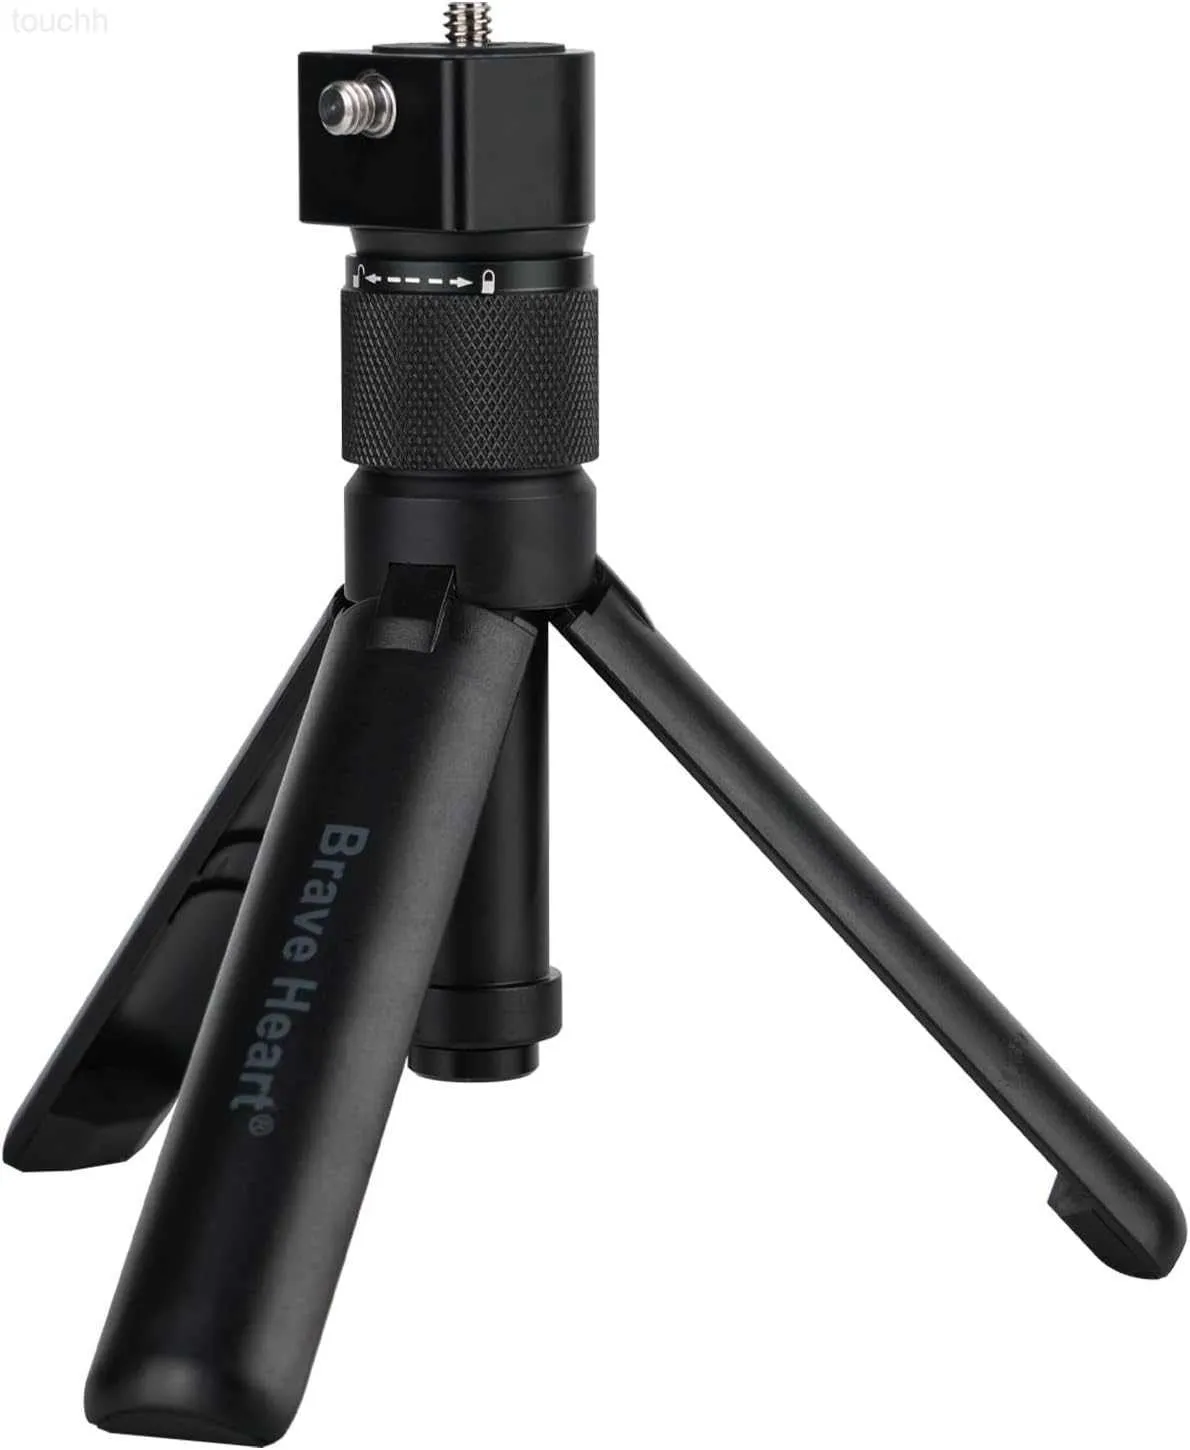 Tripods Mini One Rs Go One One One One Go Pro Sports Cameraアクセサリー（Tripod Black）L230912に適しています